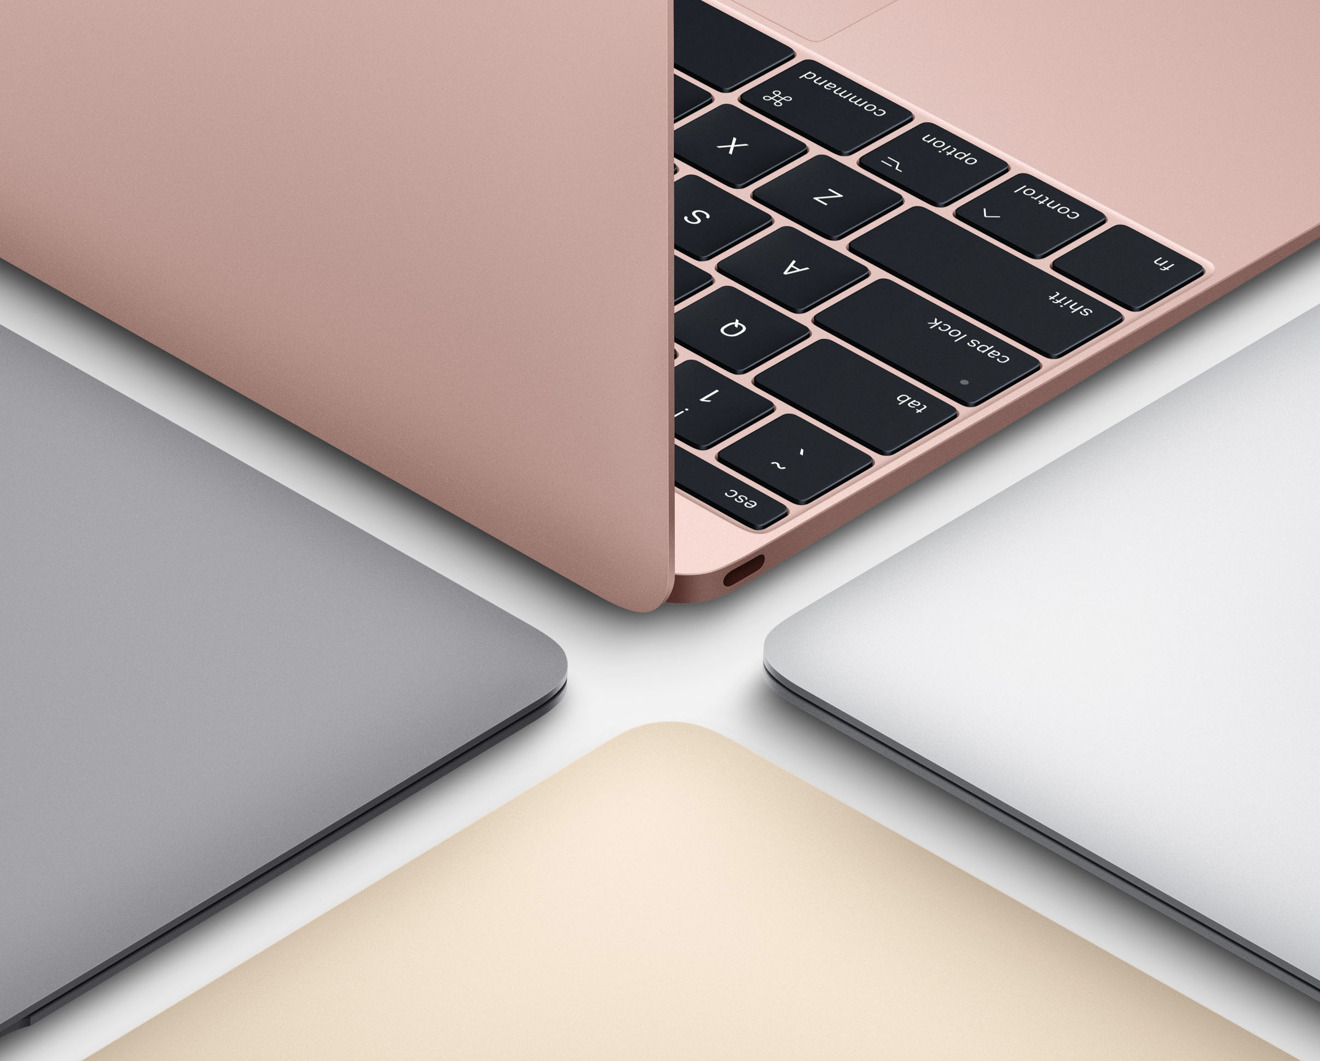 Appel 12 inch MacBook in Space Gray Silver Gold and Rose Gold